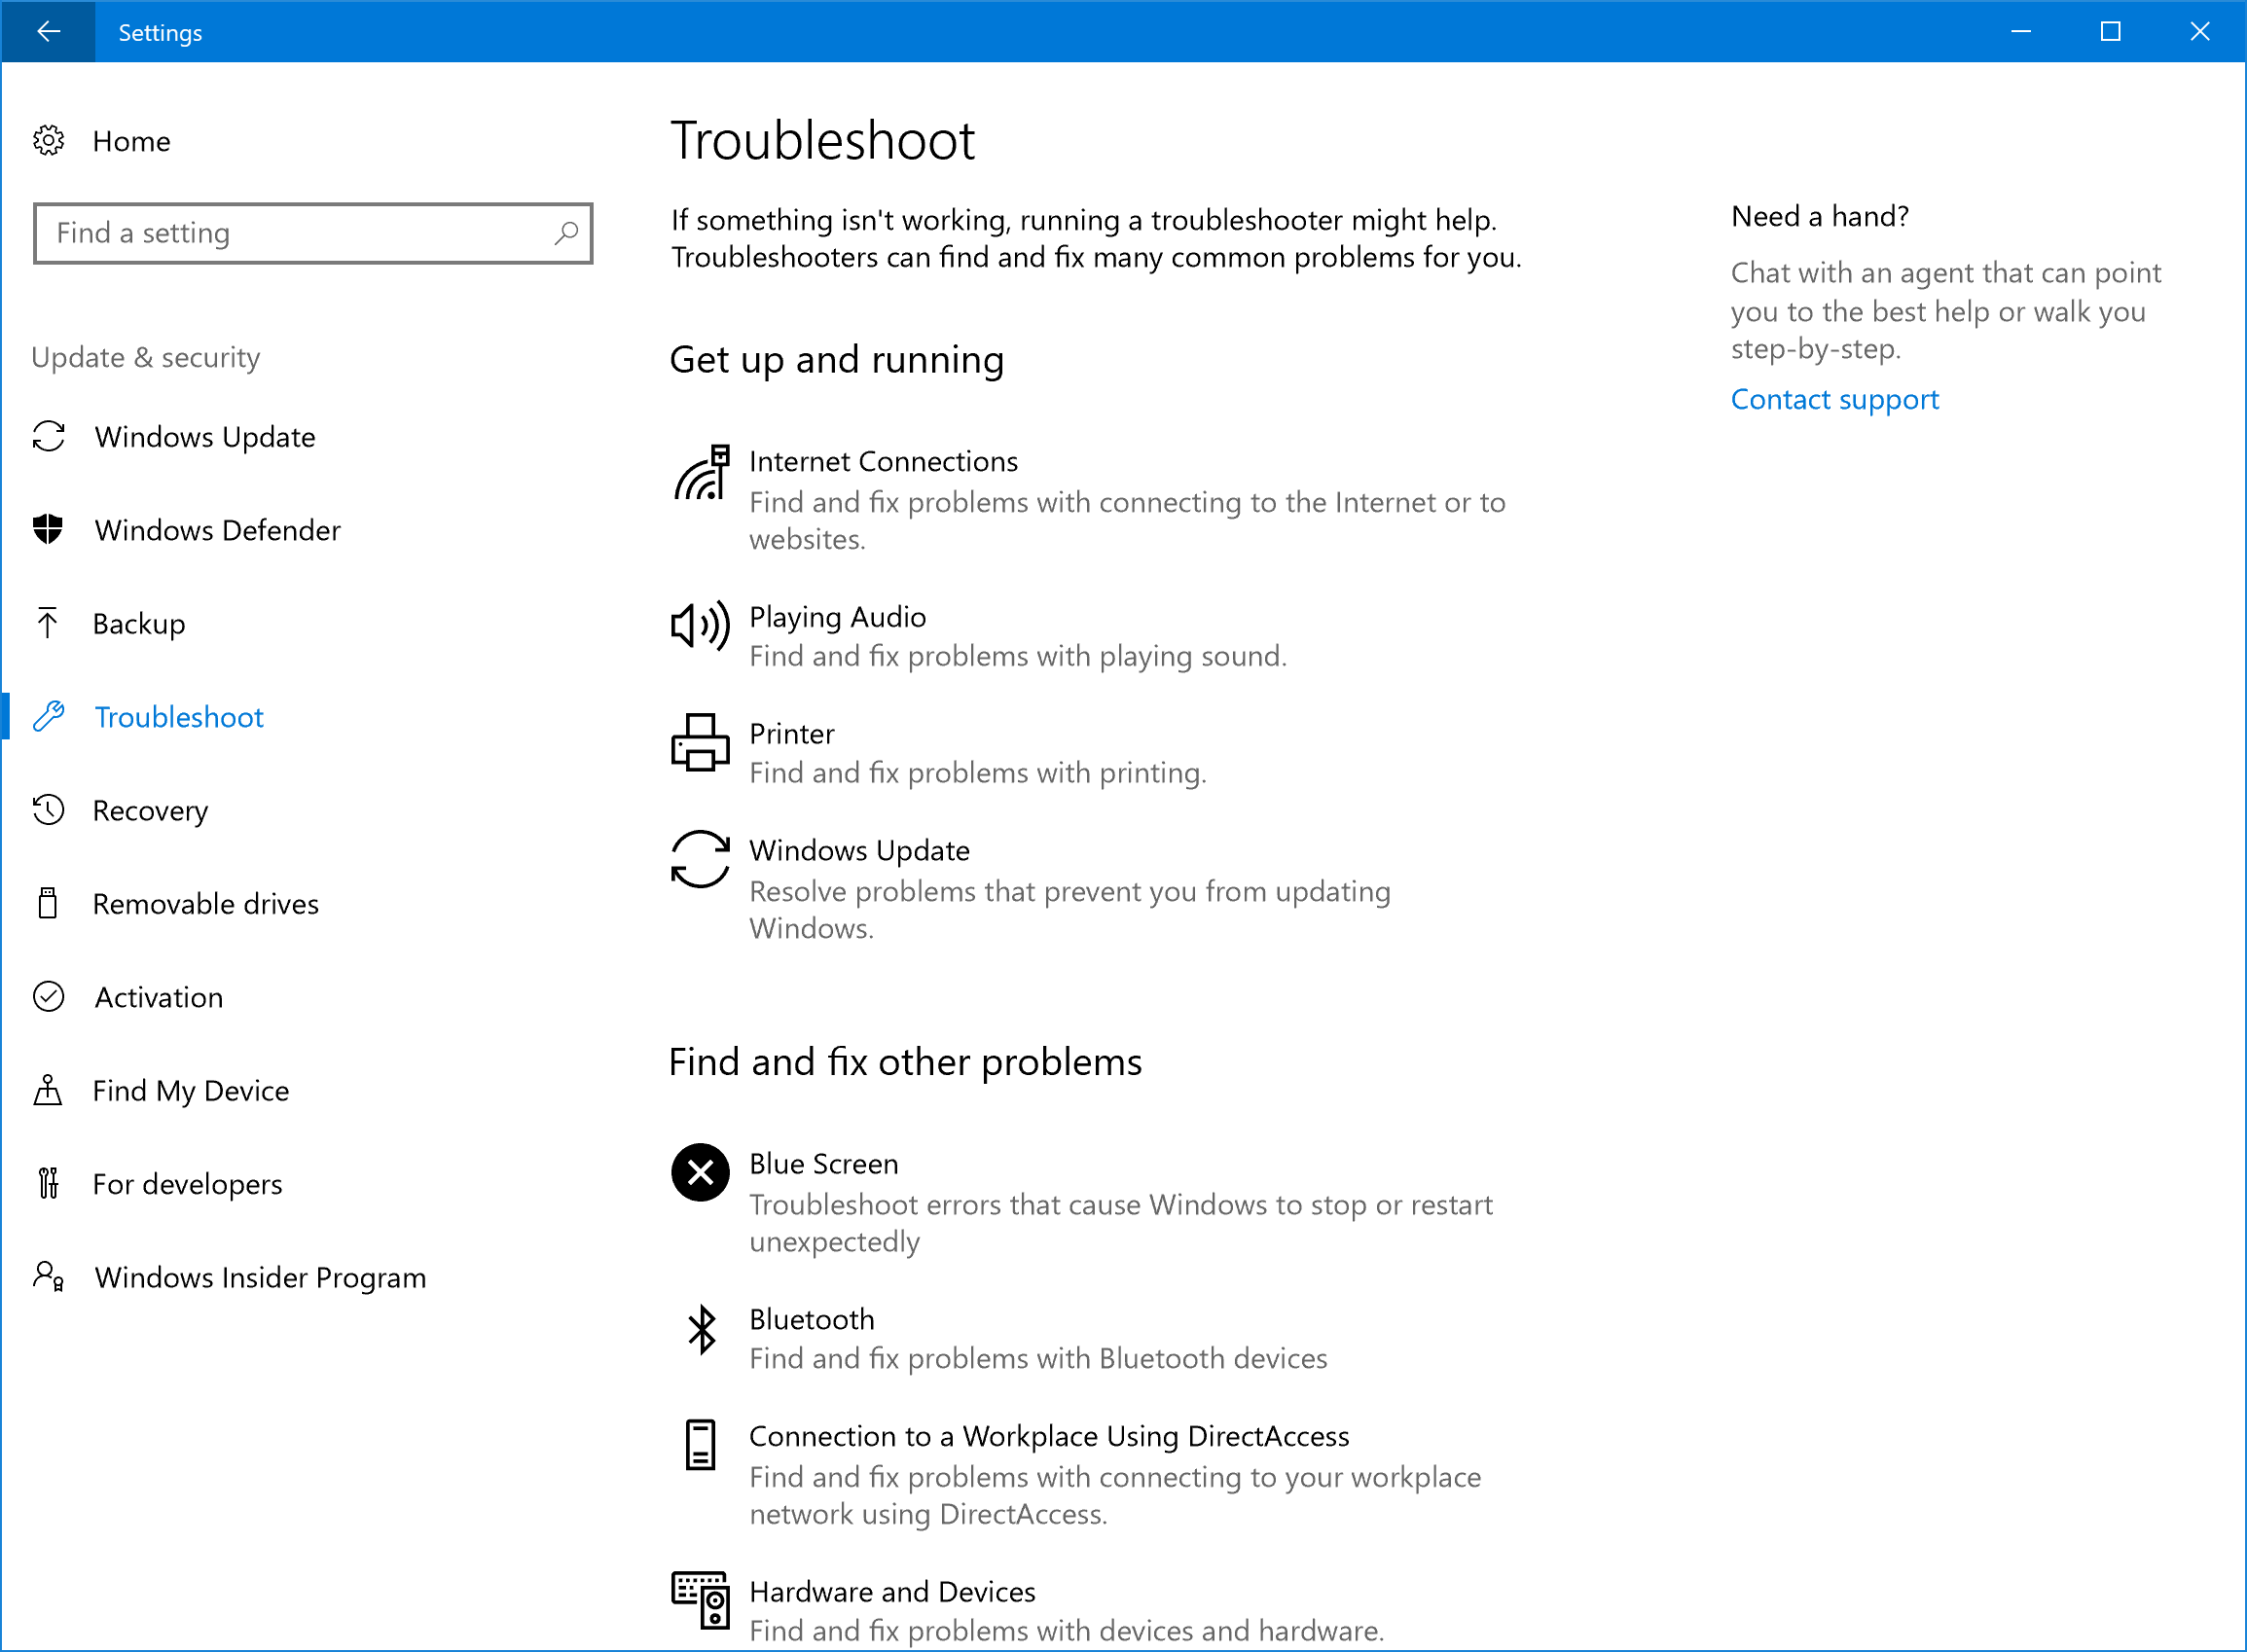 Troubleshoot settings page.